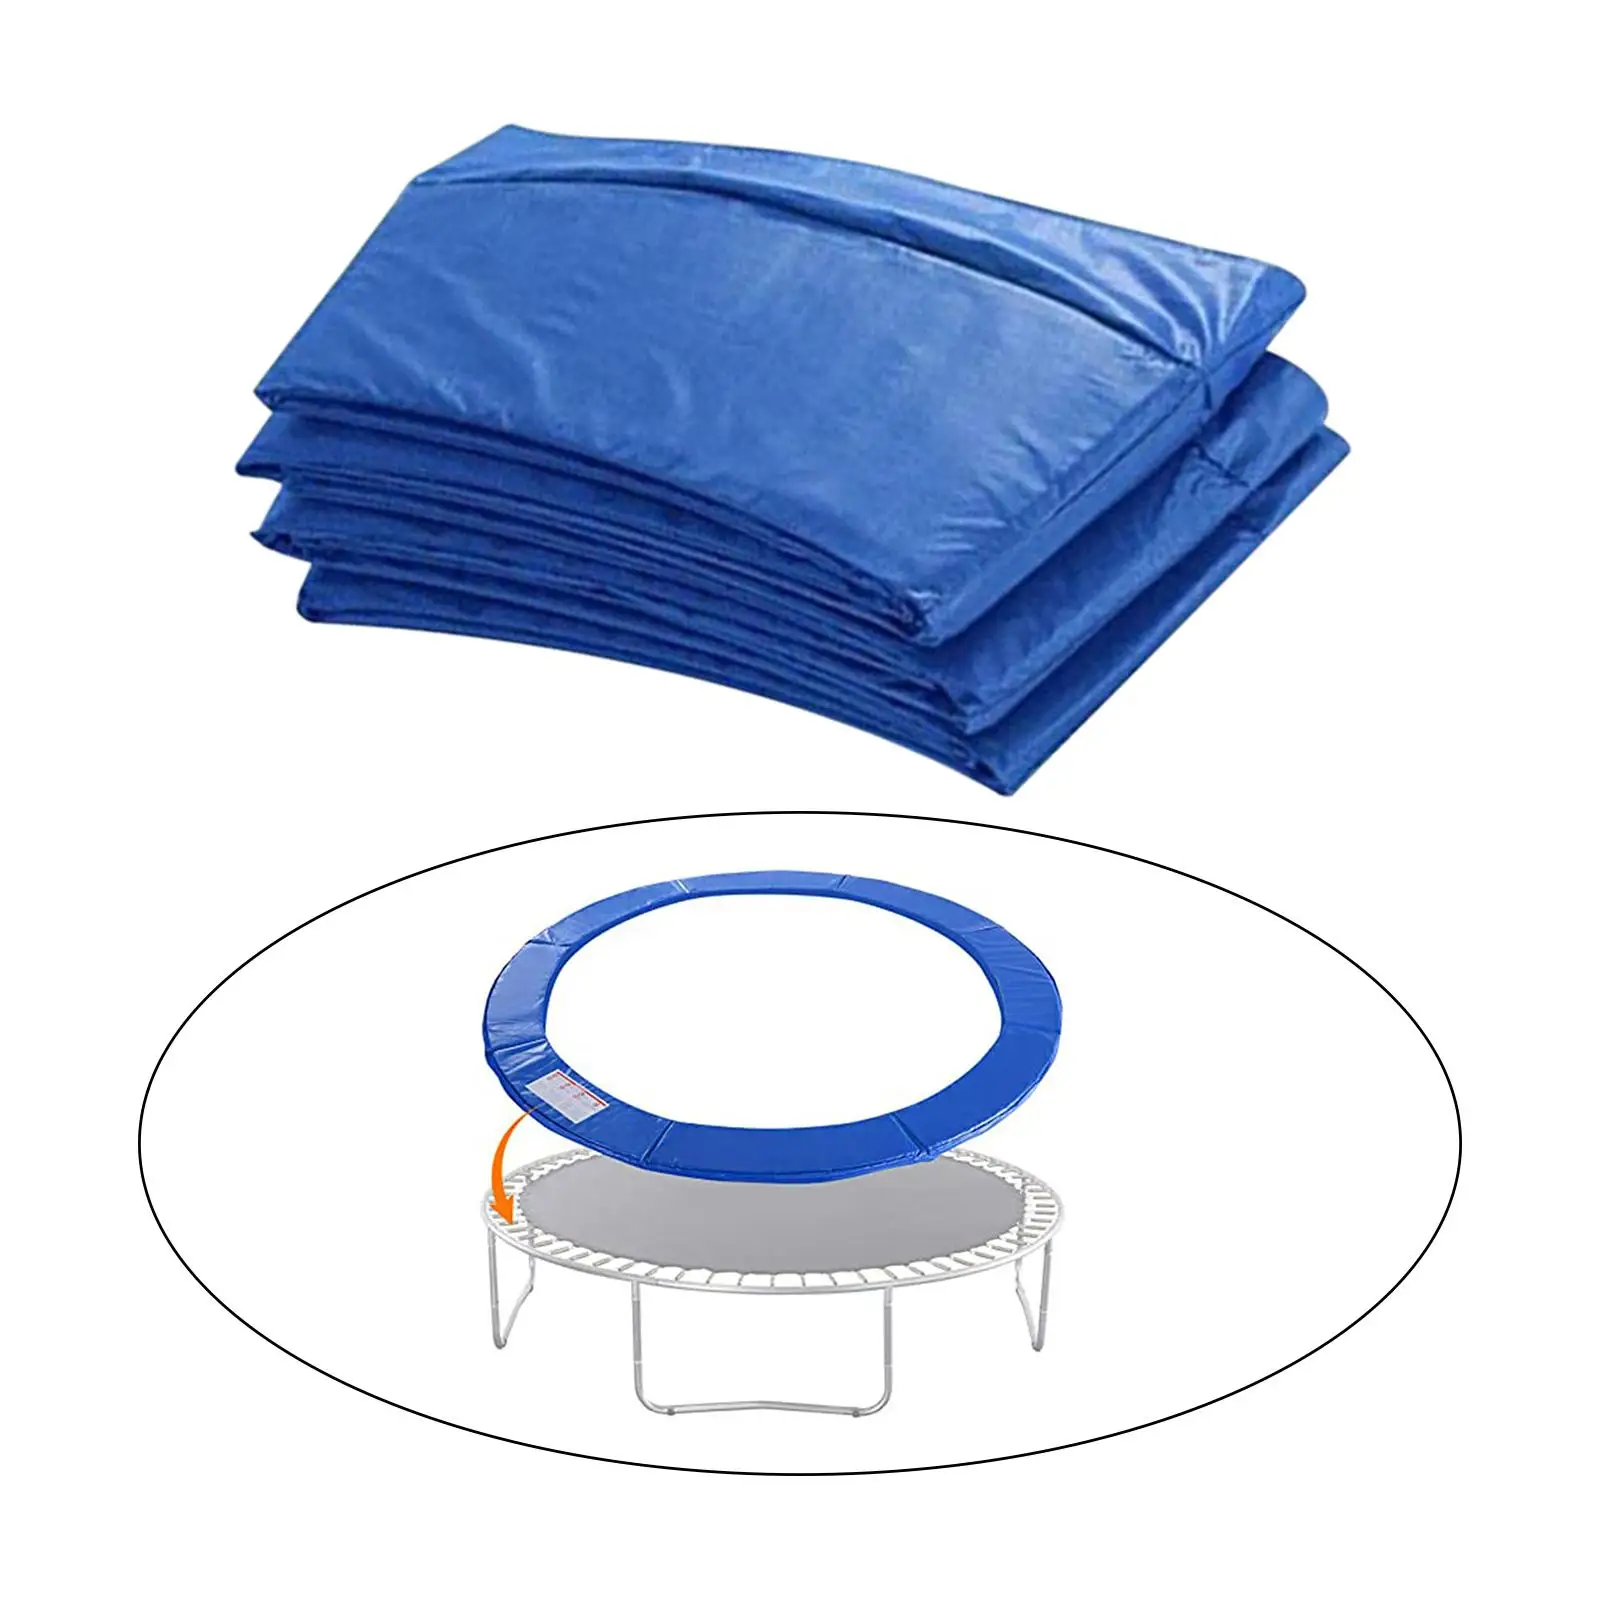 Trampoline Pad Safety Padding Replacement Durable Surround Guard Side Guard